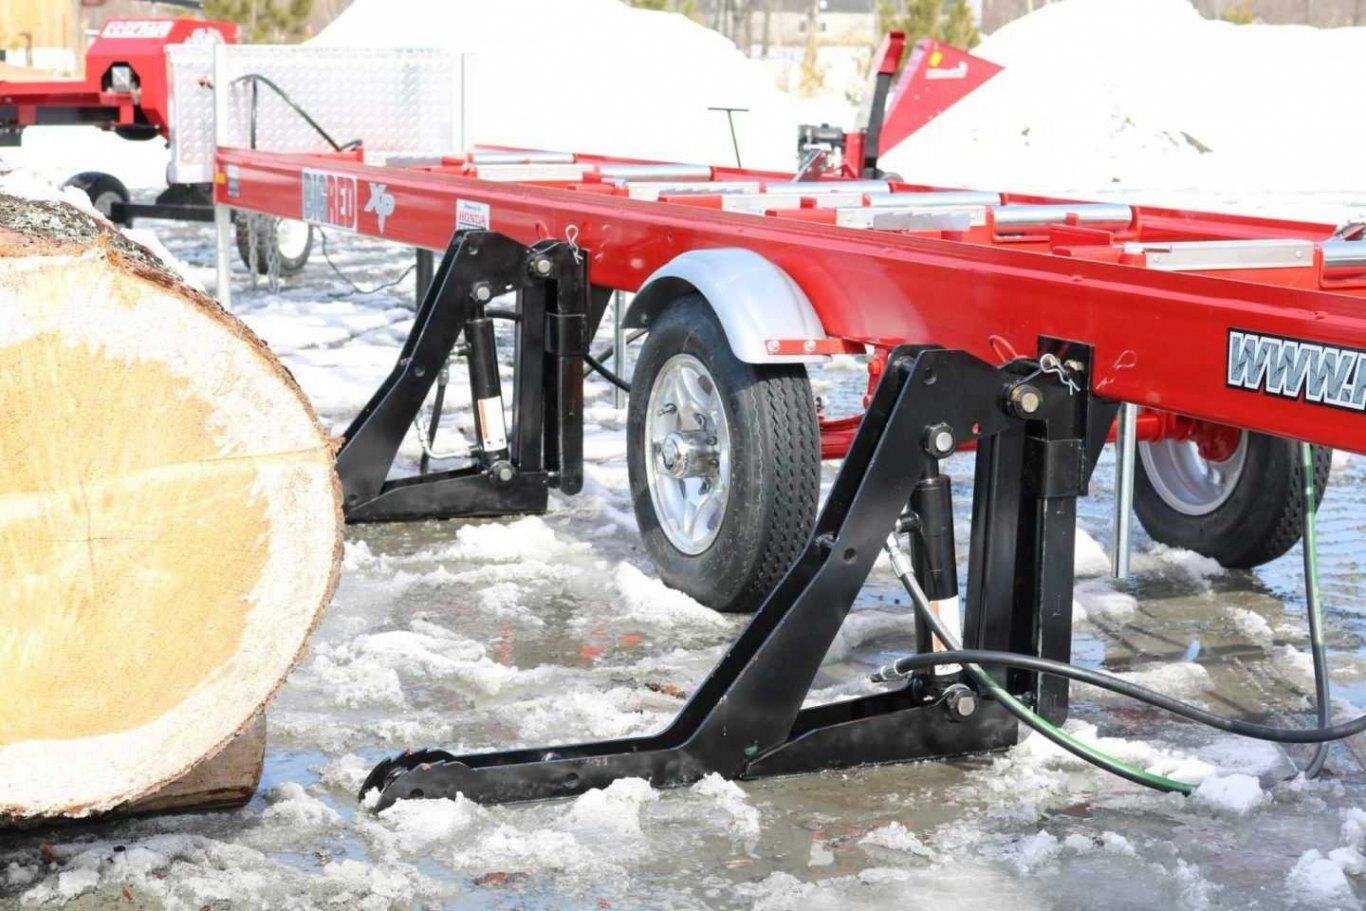 Vallee HYDRAULIC LOG LIFT FOR SAWMILLS